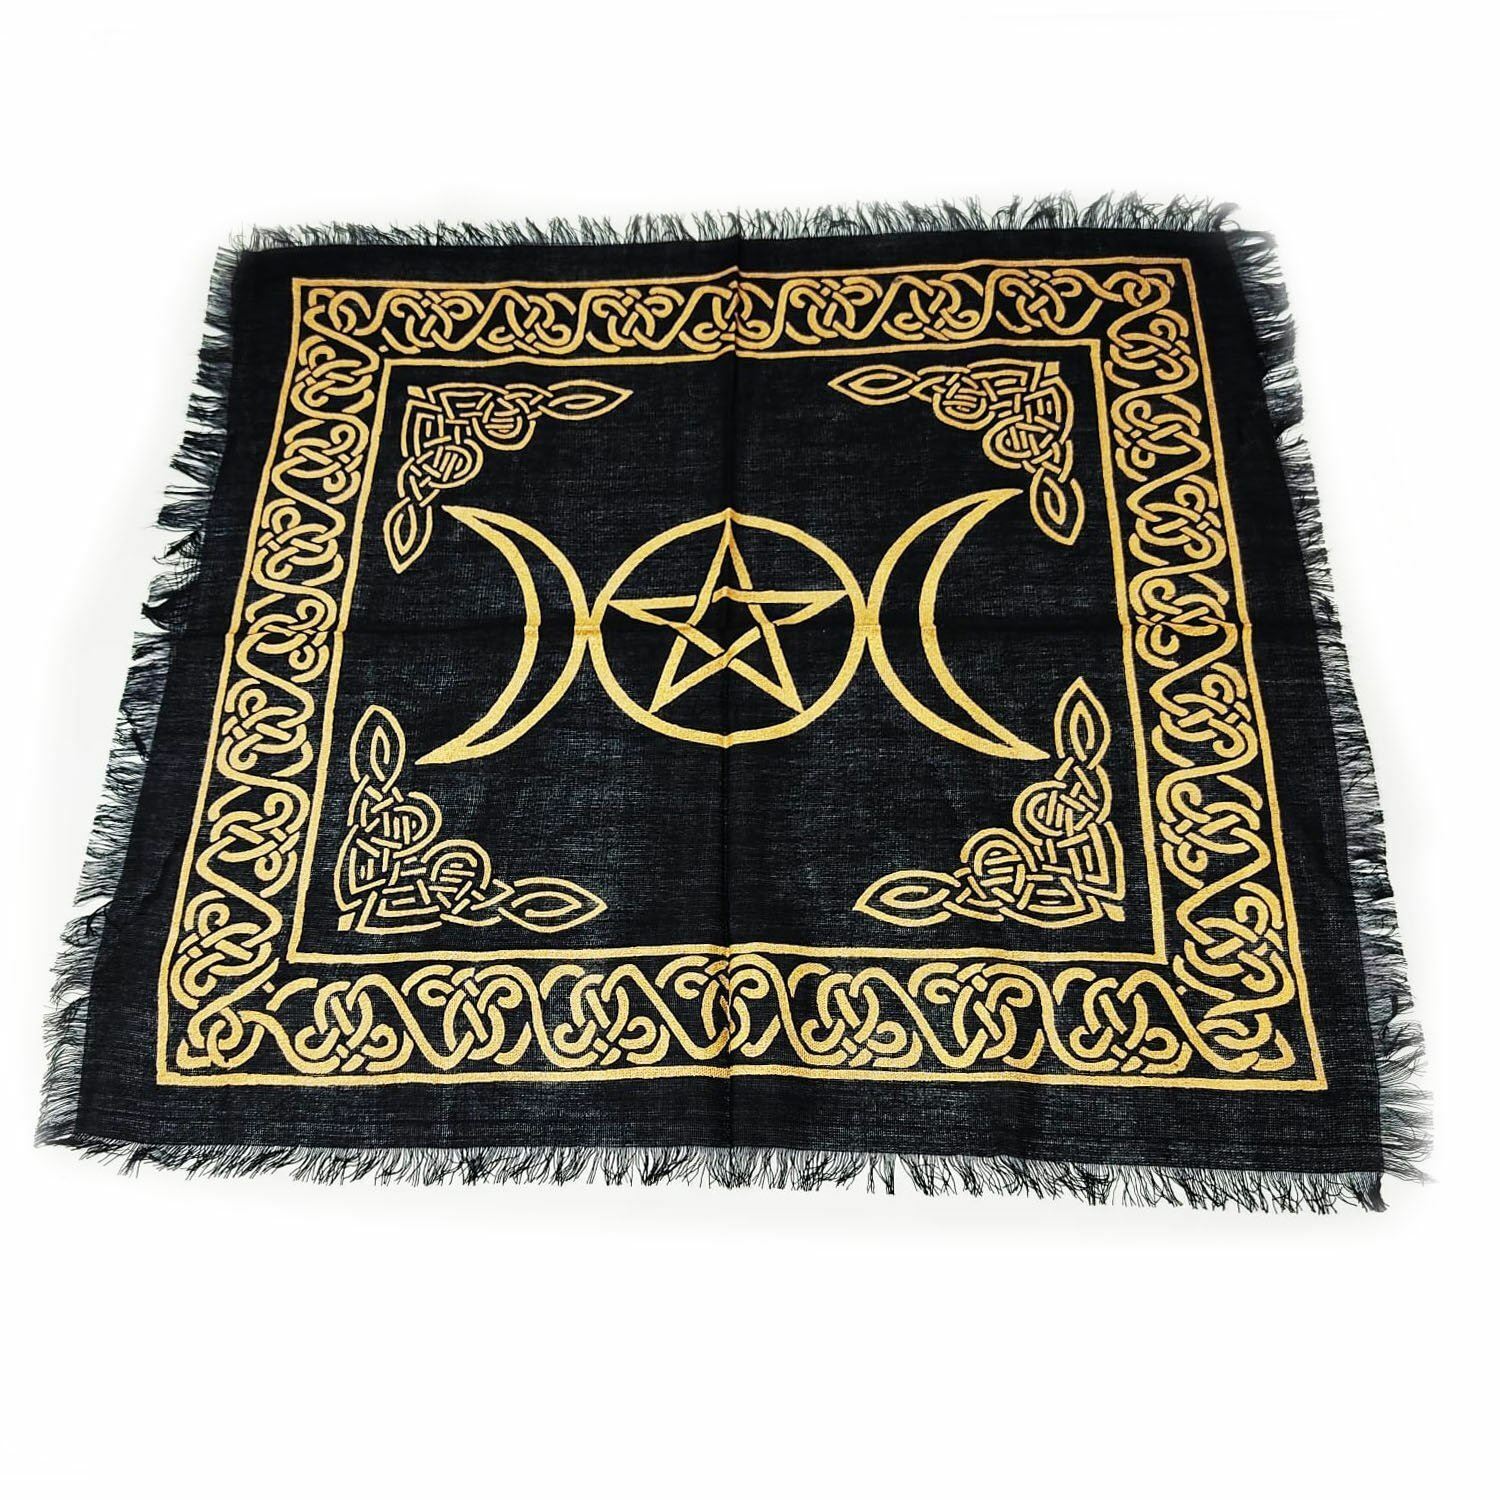 18" X 18" Altar Cloth Triple Moon Black And Gold Rayon Wiccan Witchcraft Altar D